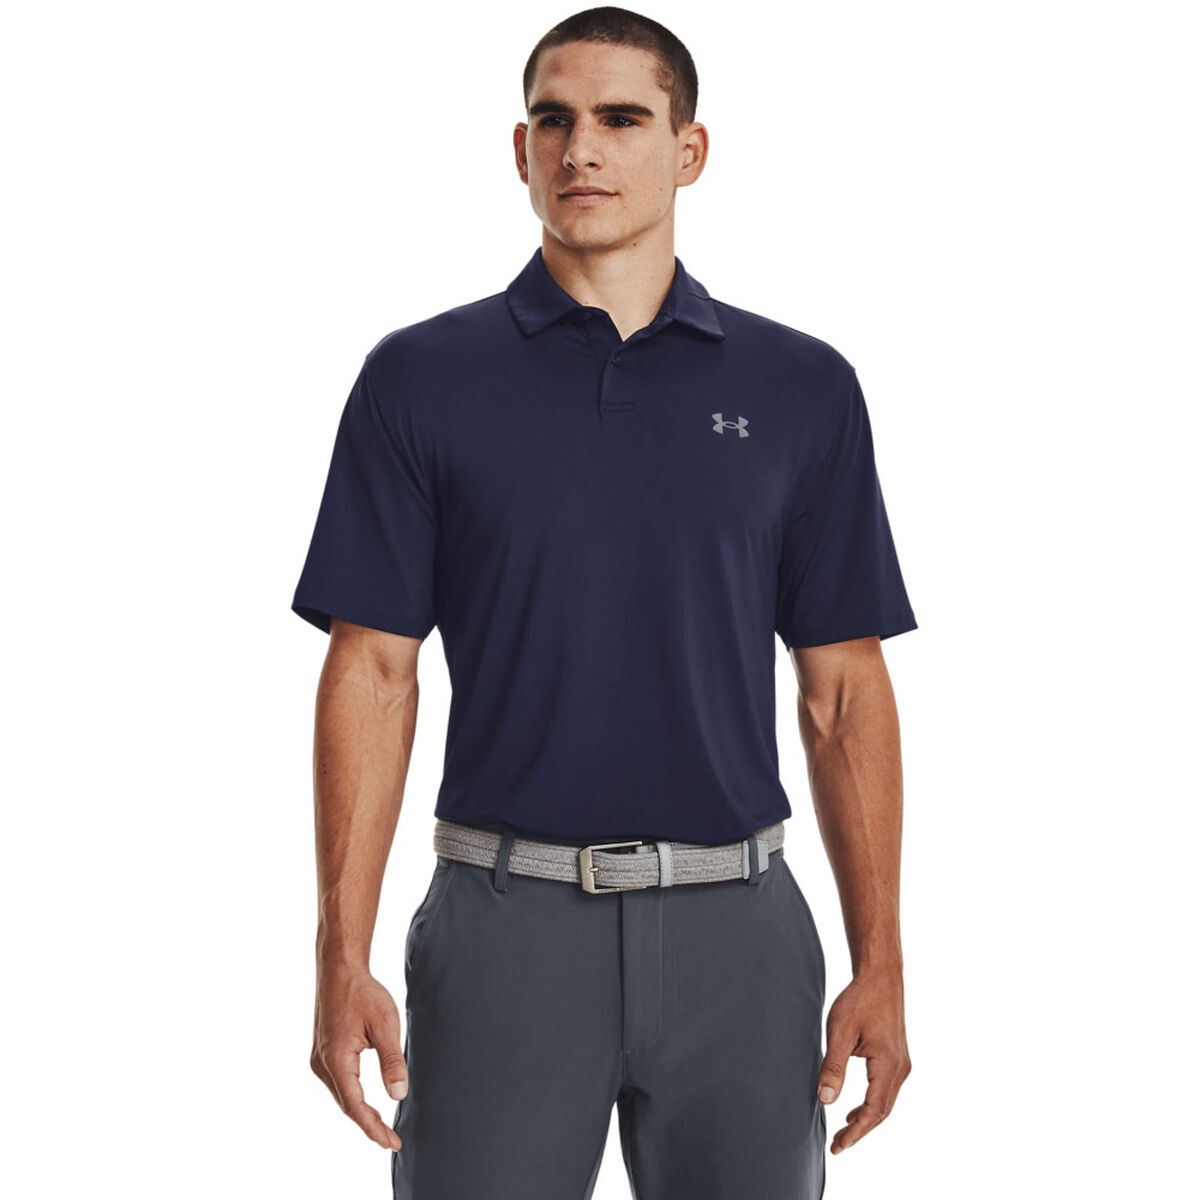 Under Armour Men’s Navy Blue and Grey T2G Golf Polo Shirt, Size: L | American Golf